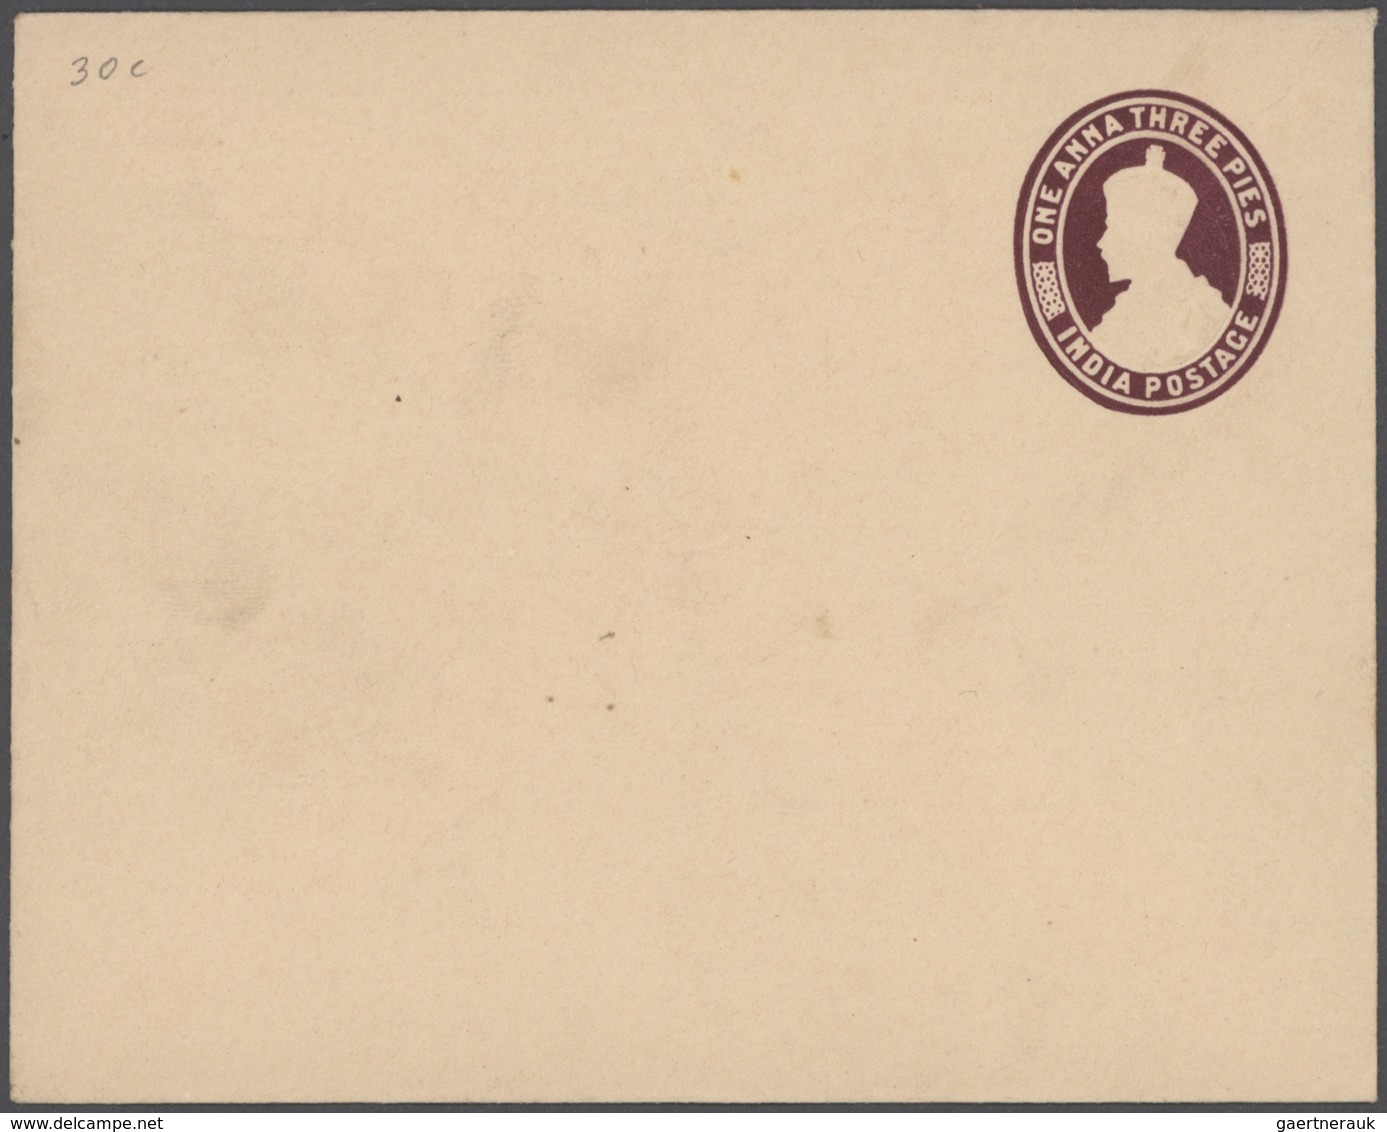 Indien - Ganzsachen: 1857-1947 "THE POSTAL STATIONERY OF BRITISH INDIA": Specialized collection of a